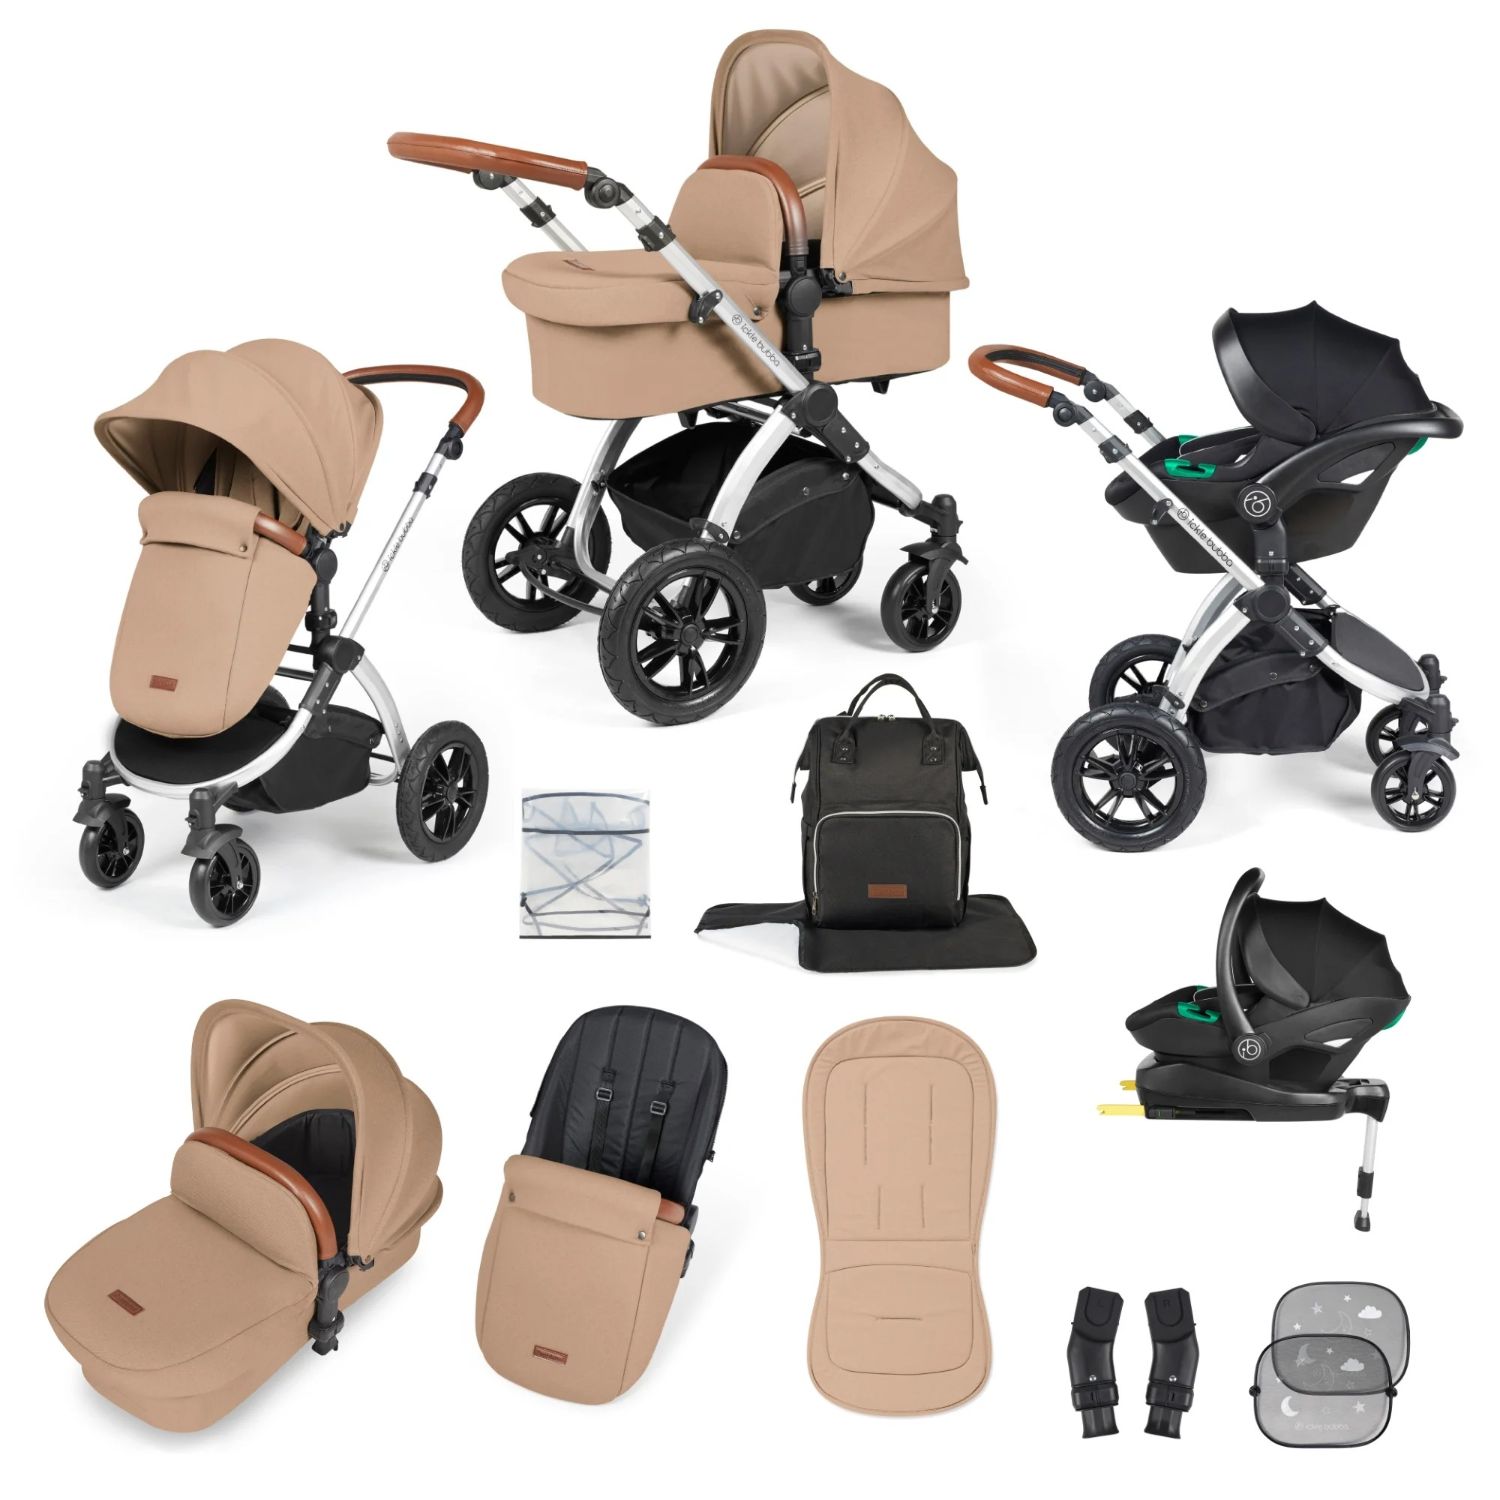 Ickle Bubba Stomp Luxe All-in-One Travel System with Stratus i-Size Car Seat and ISOFIX Base and accessories in Desert beige colour with silver chassis and tan handle